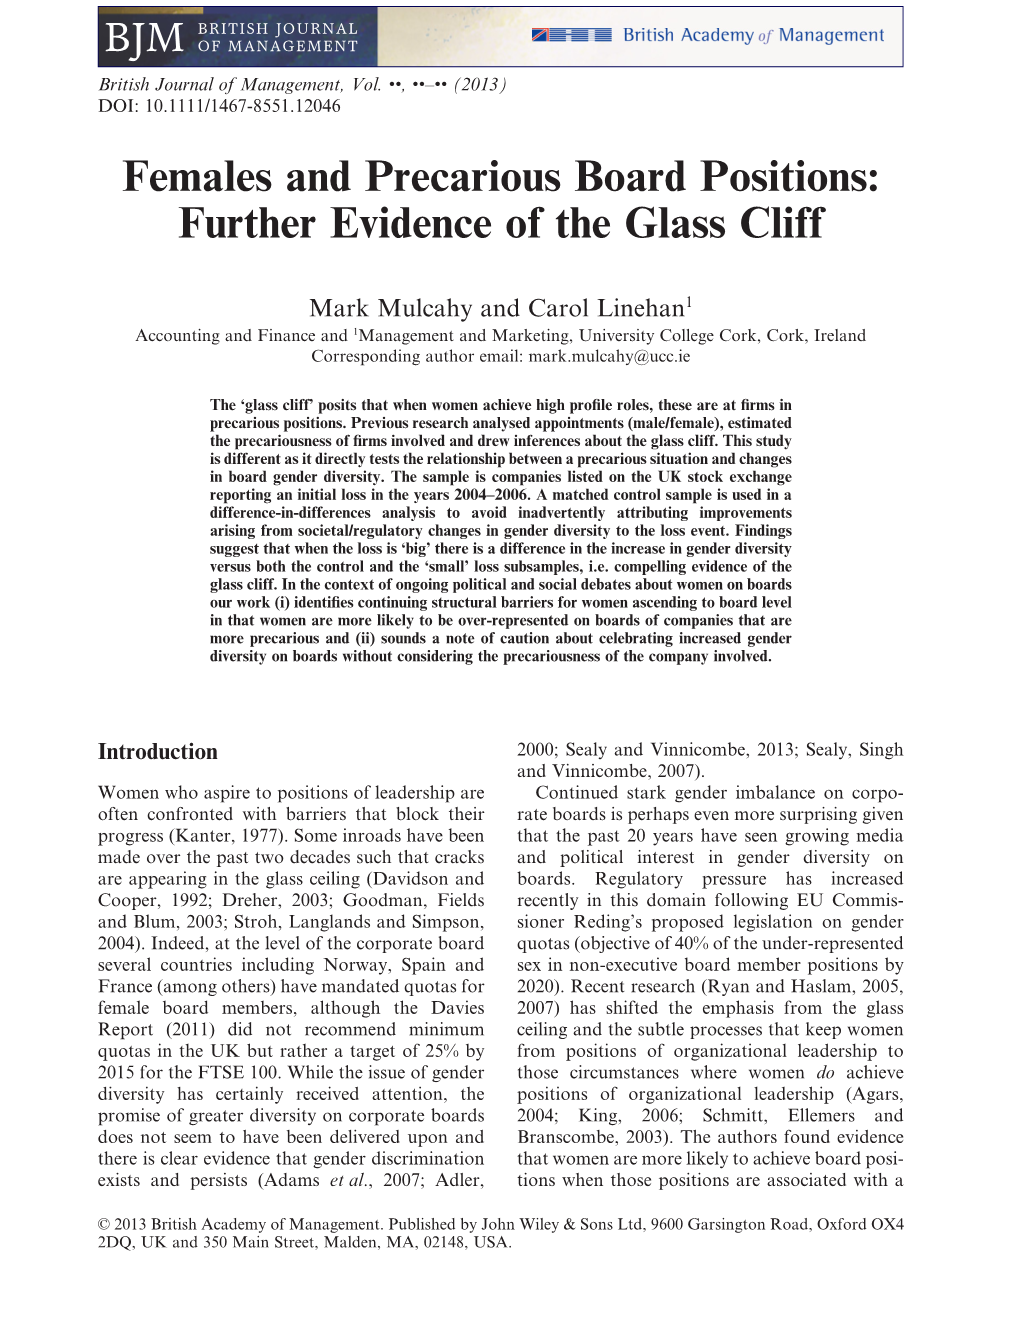 Females and Precarious Board Positions: Further Evidence of the Glass Cliff